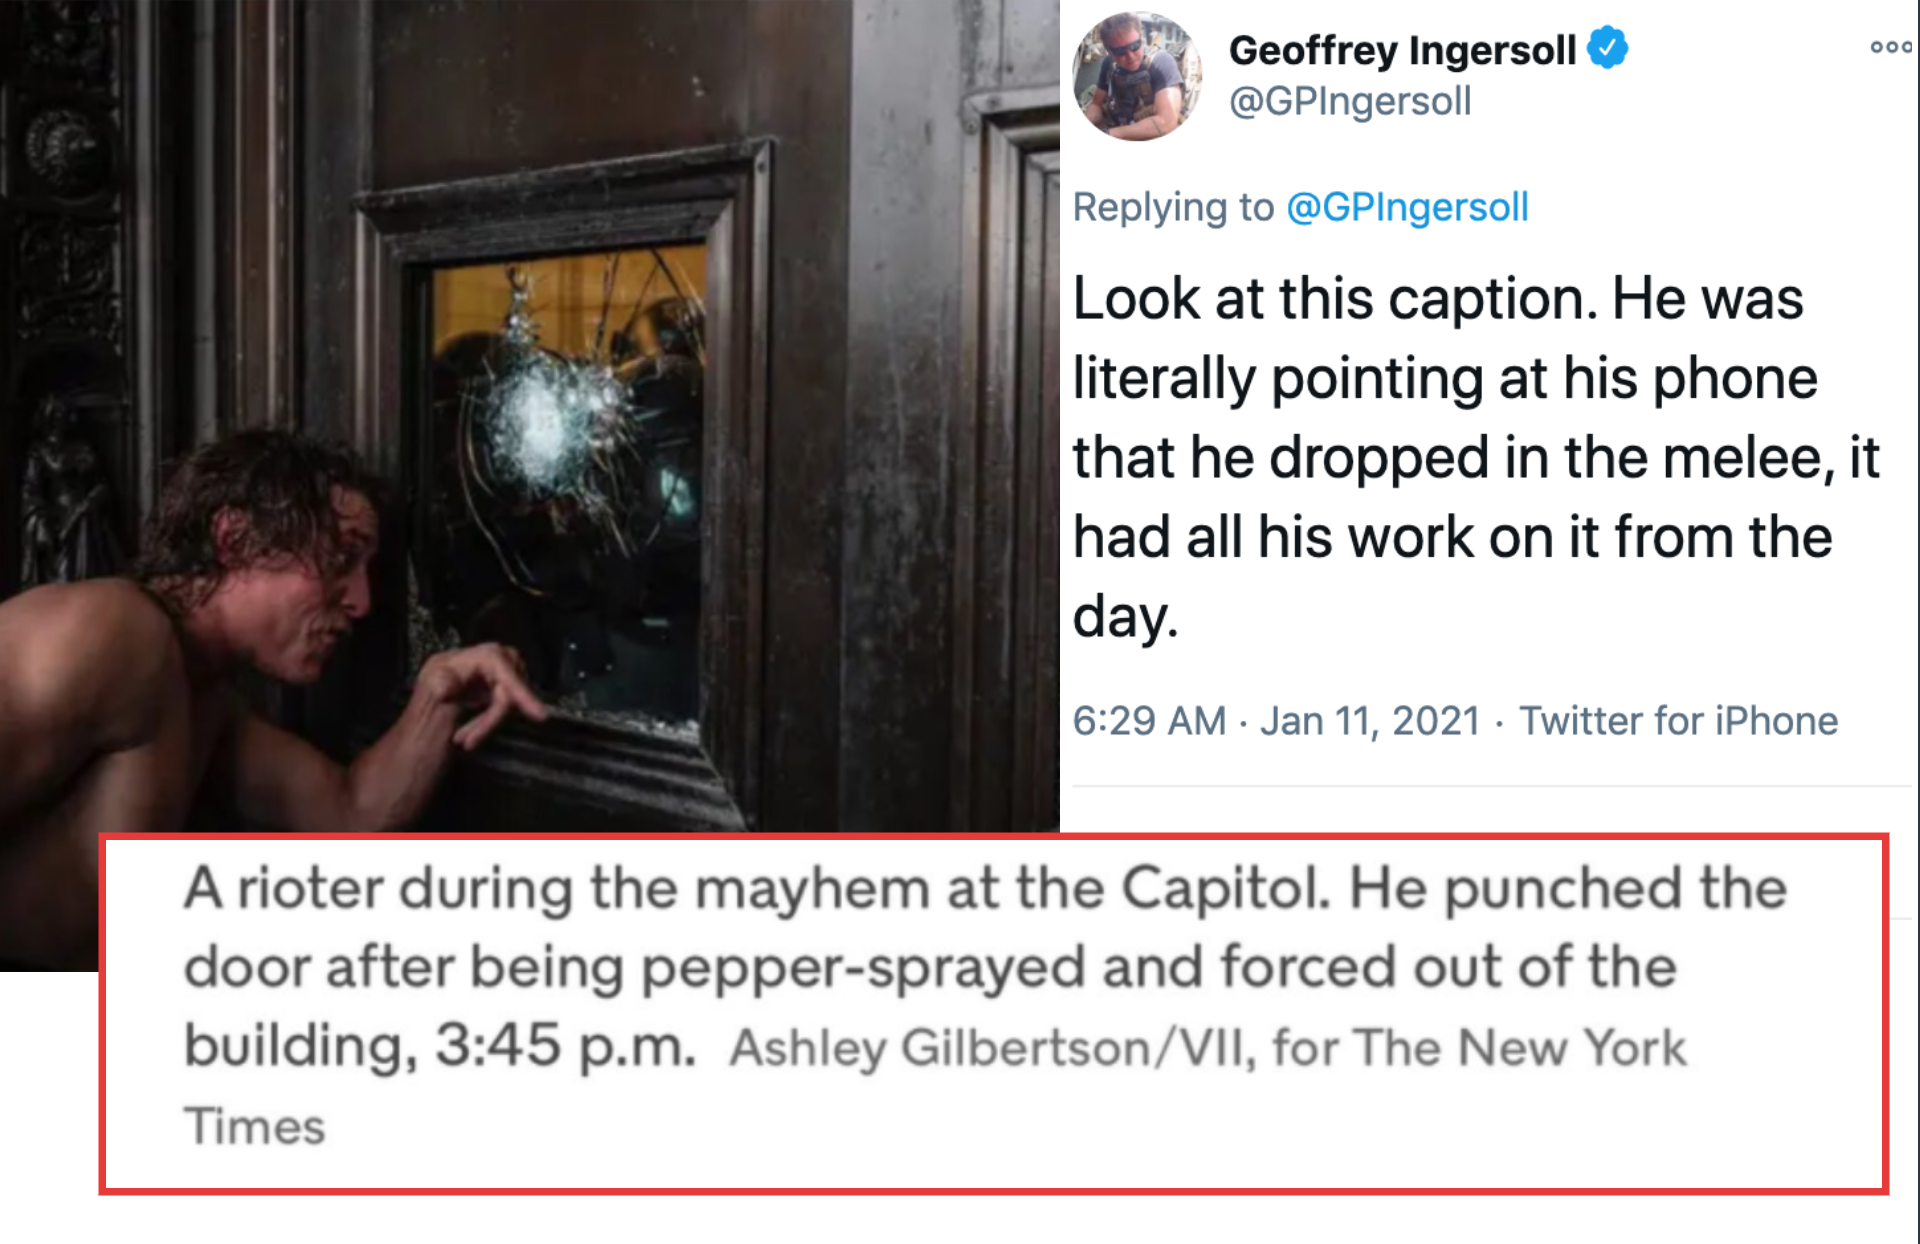 New York Times Smears Conservative Reporter As A Violent Capitol Rioter